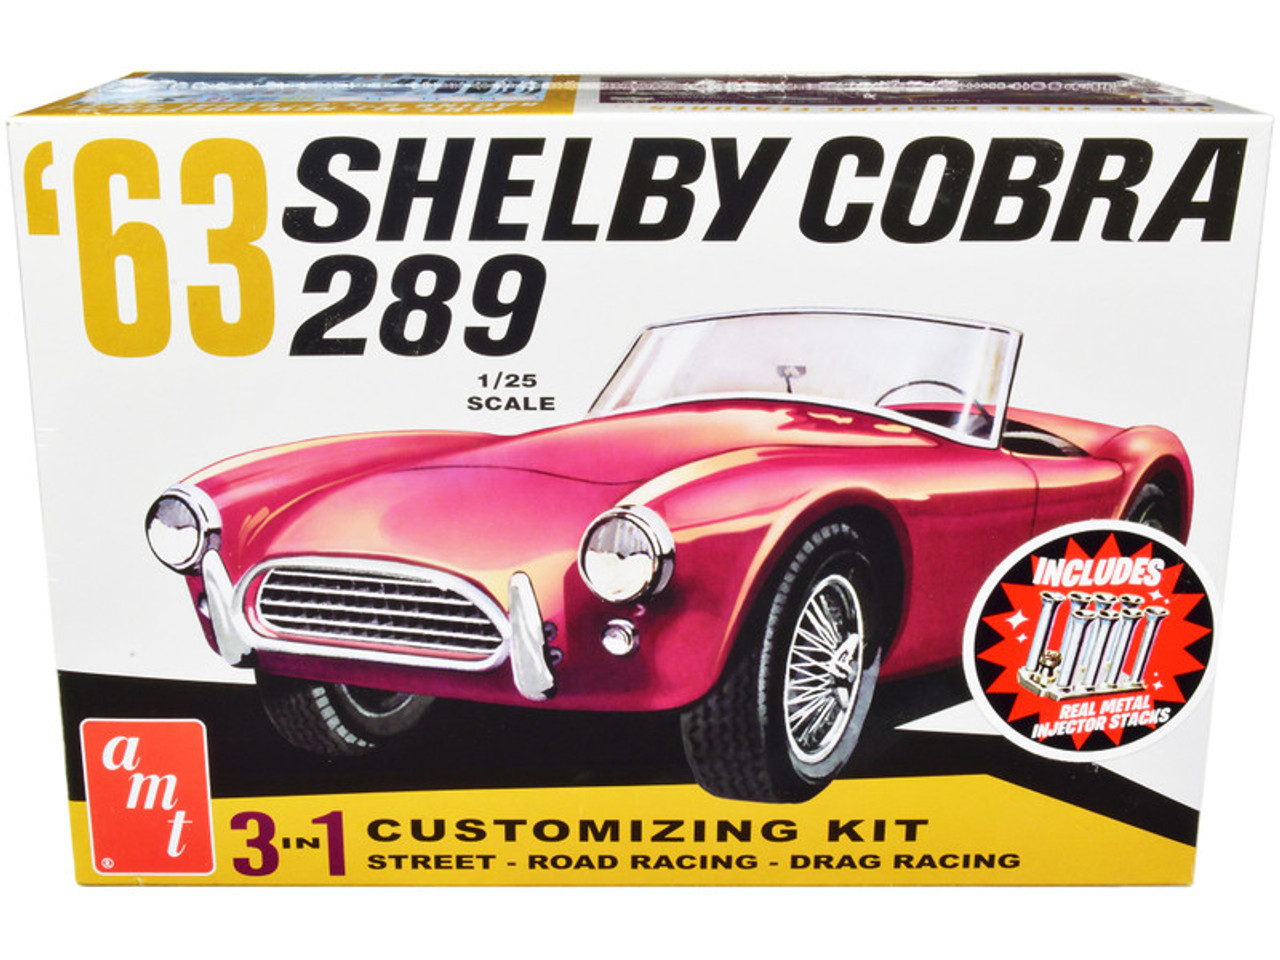 Skill 2 Model Kit 1963 Ford Shelby Cobra 289 3 in 1 Kit 1/25 Scale Model by AMT